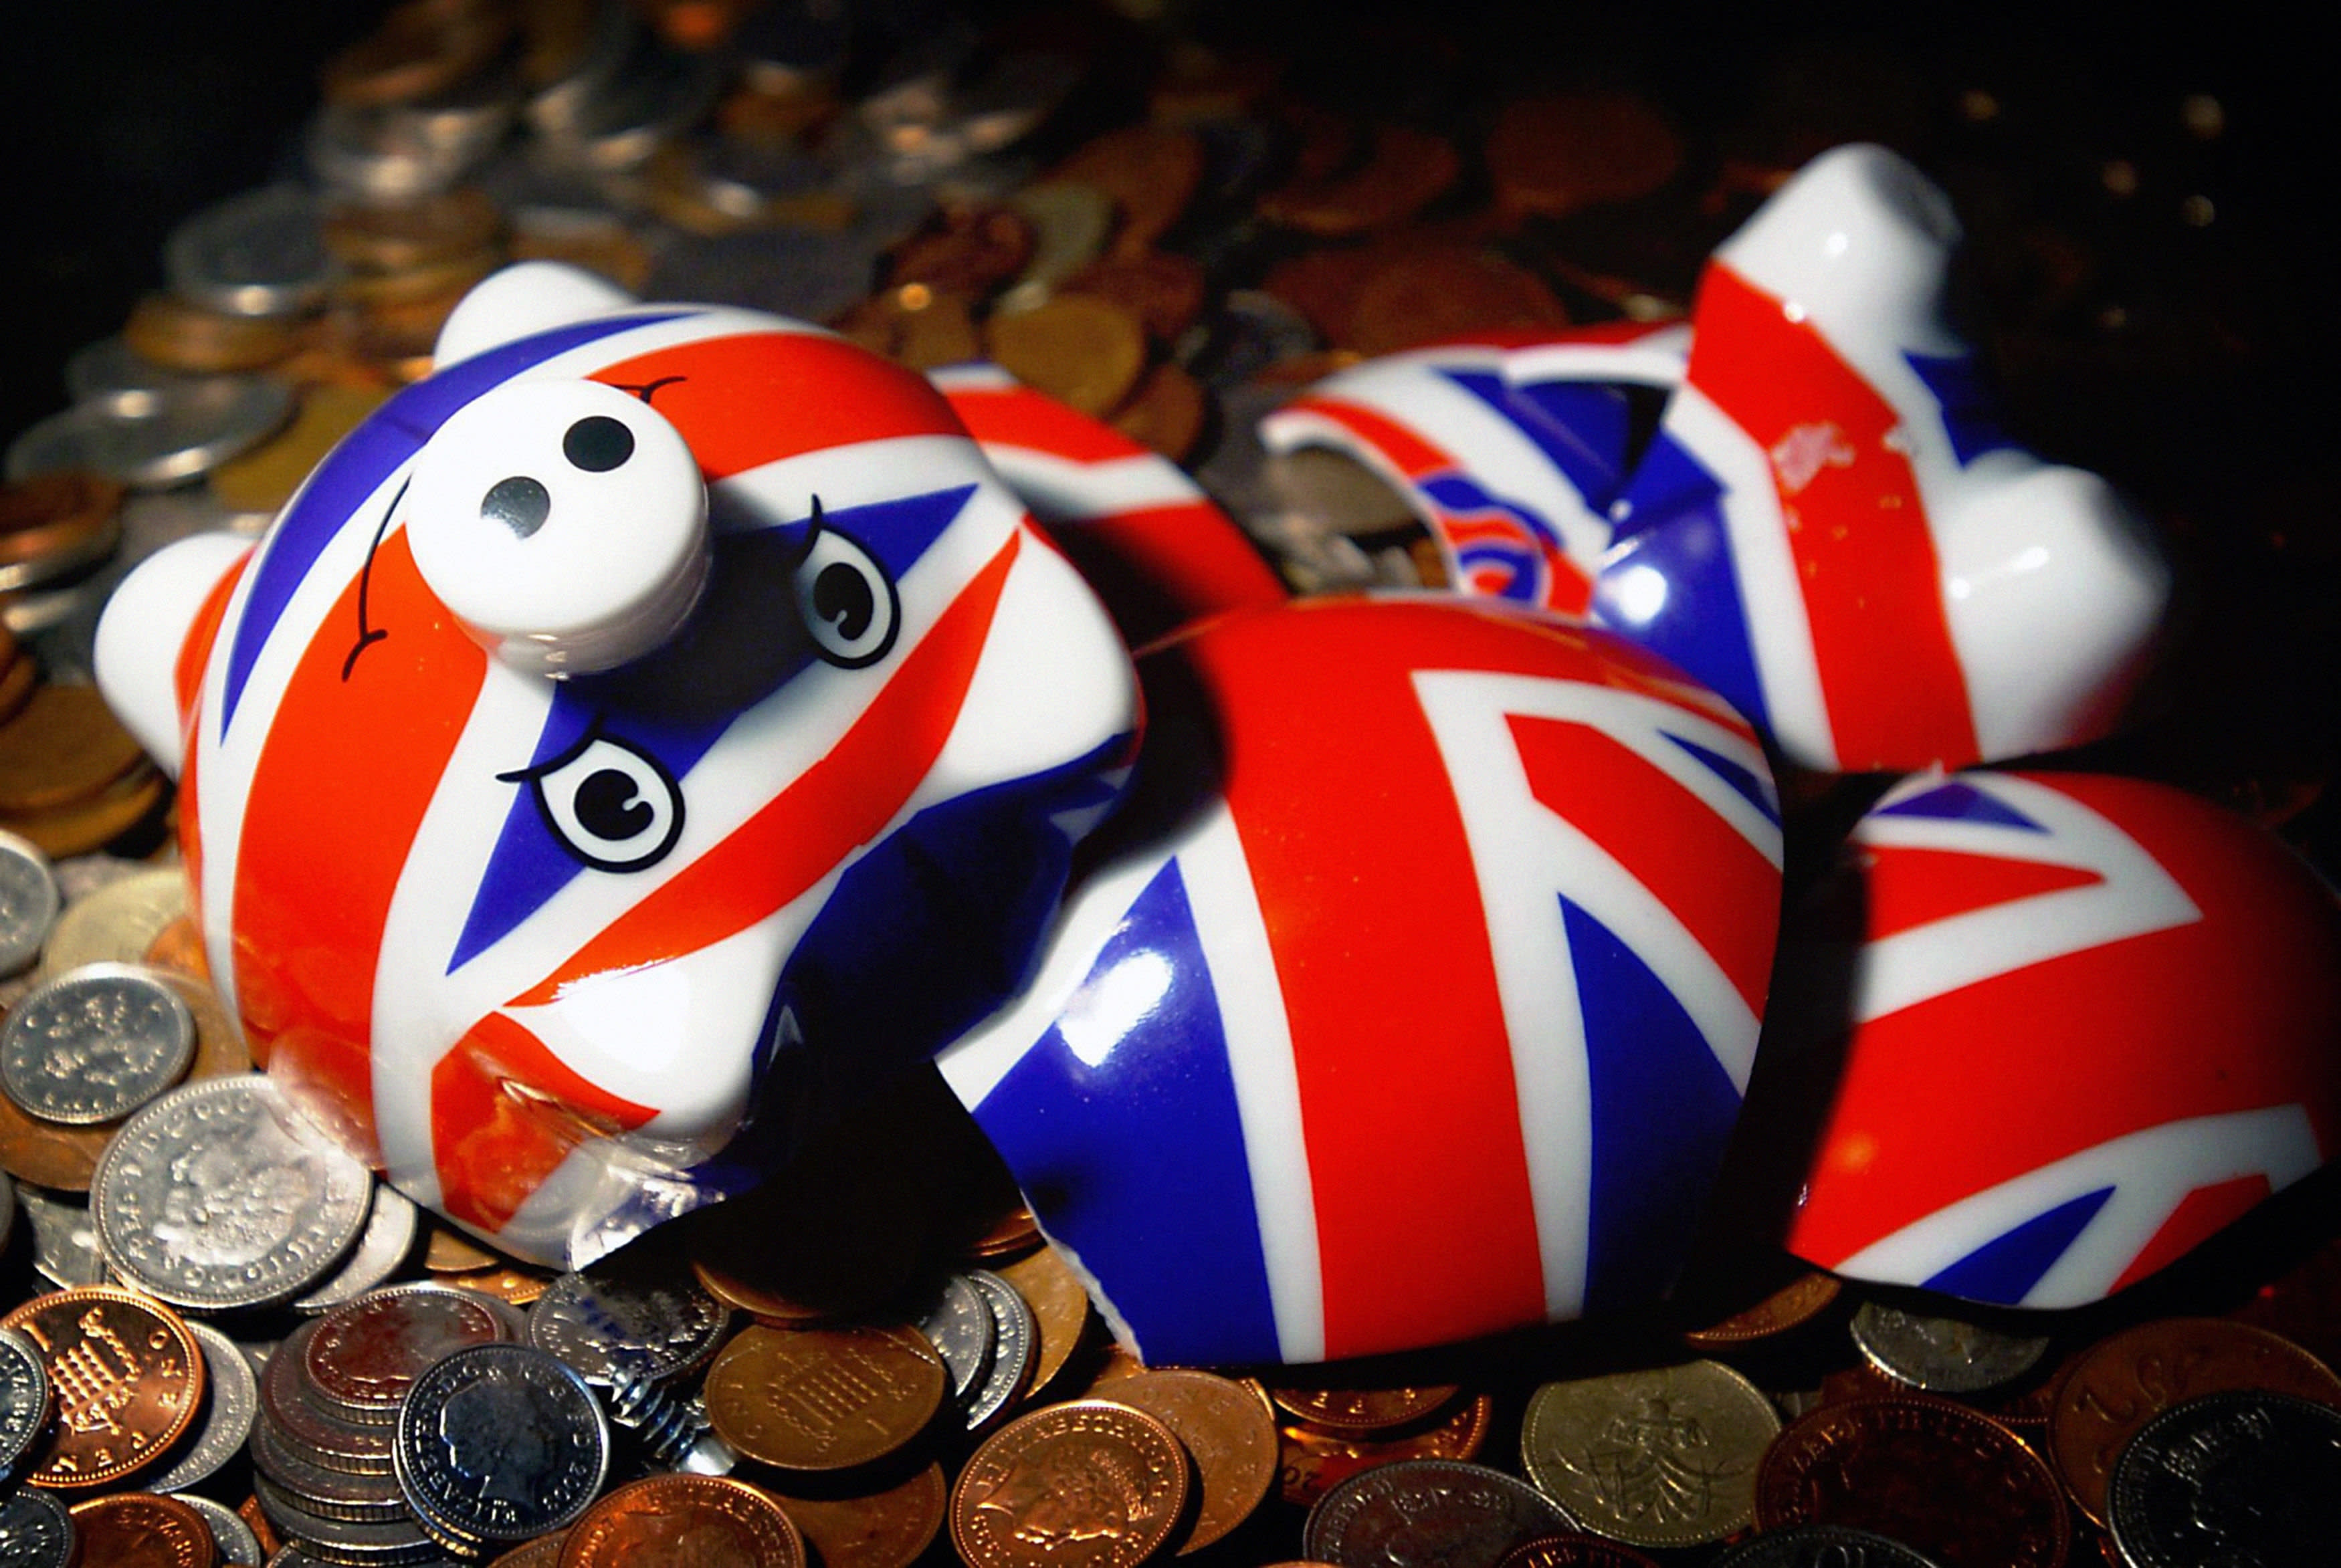 IFS tells govt to consider pension tax hike to pay off Covid debt